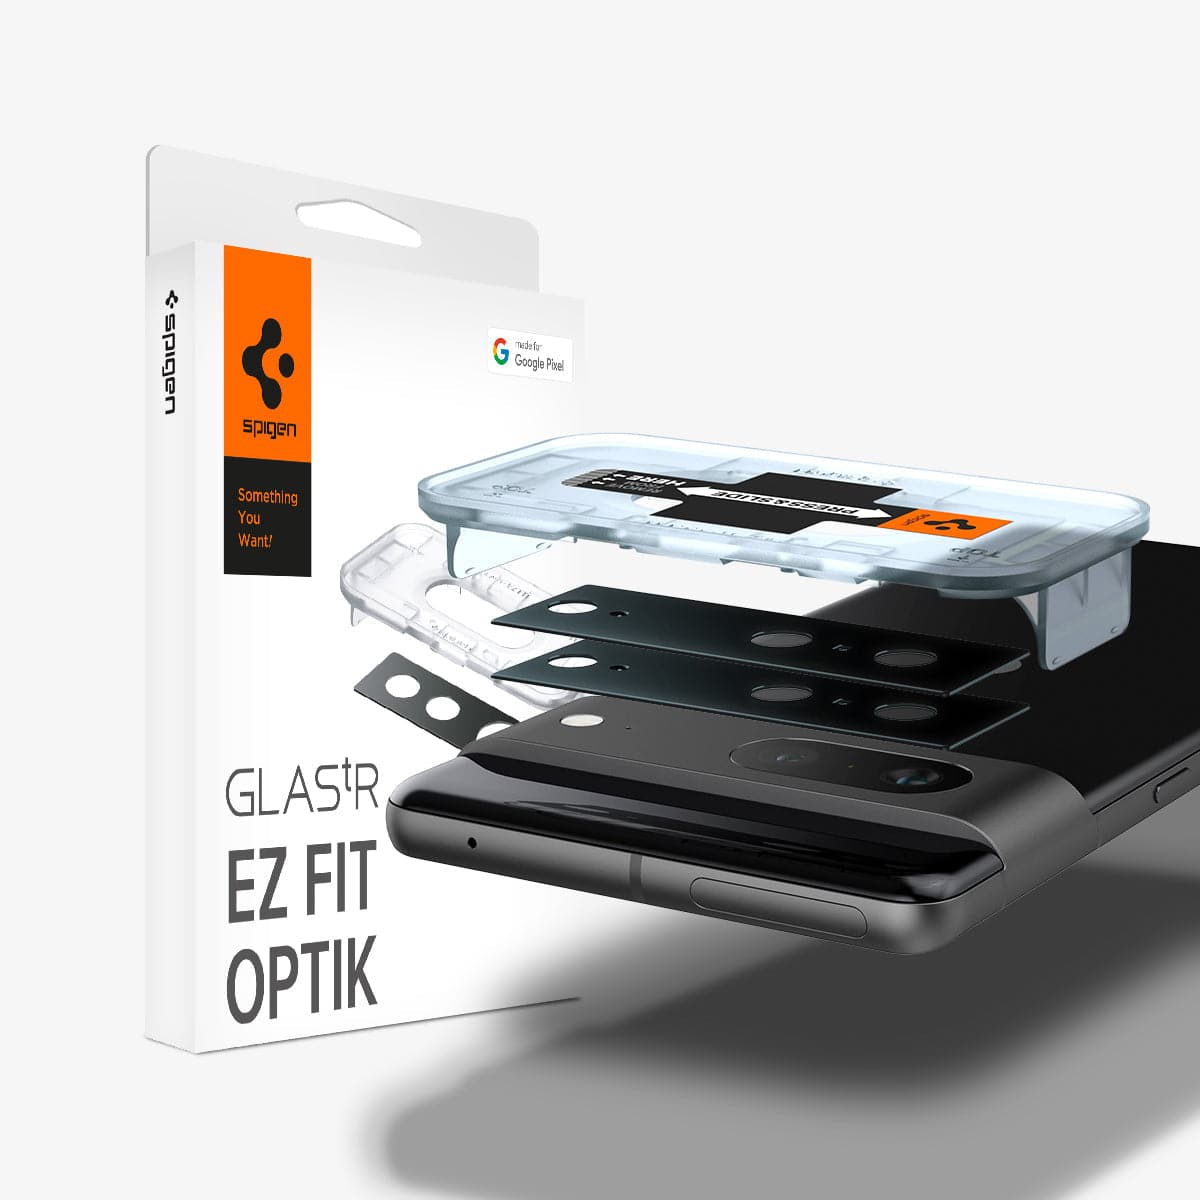 AGL05471 - Pixel 7 Optik Lens Protector in black showing the device, two optik lens protectors, ez fit tray and packaging